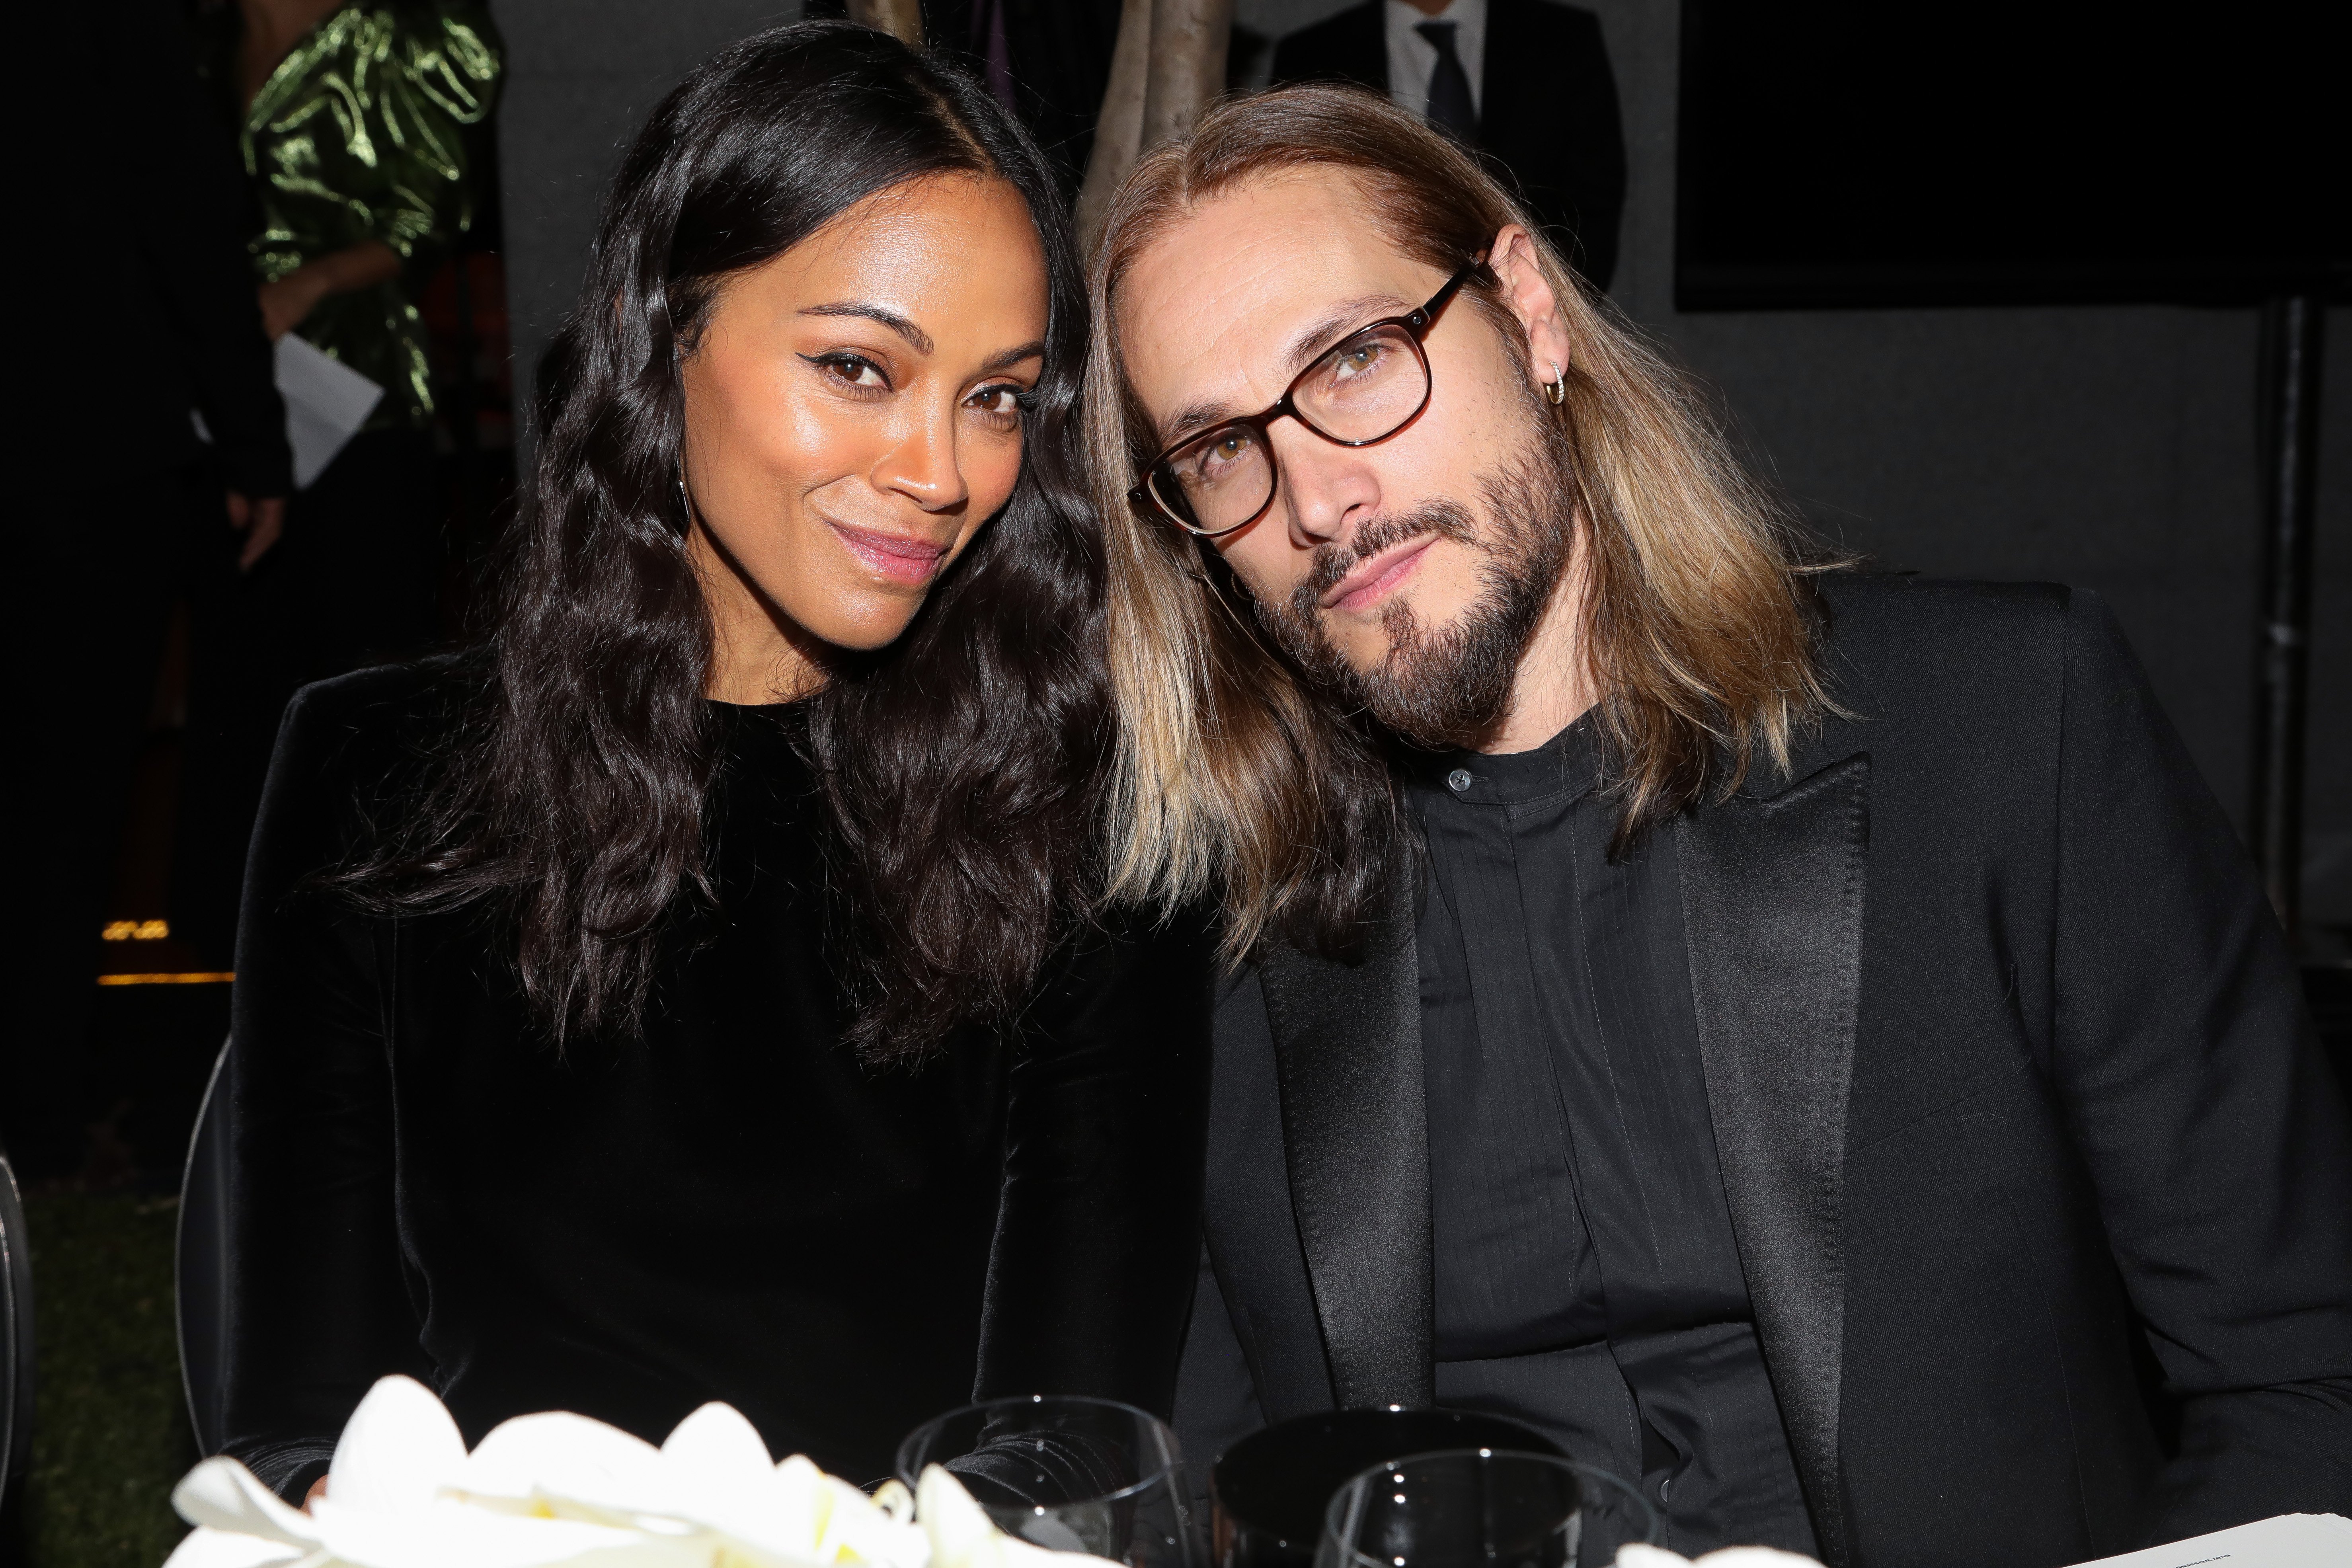 Zoe Saldana and Marco Perego pose during the amfAR gala dinner at the house of collector and museum patron Eugenio López on February 5, 2019. | Photo: GettyImages